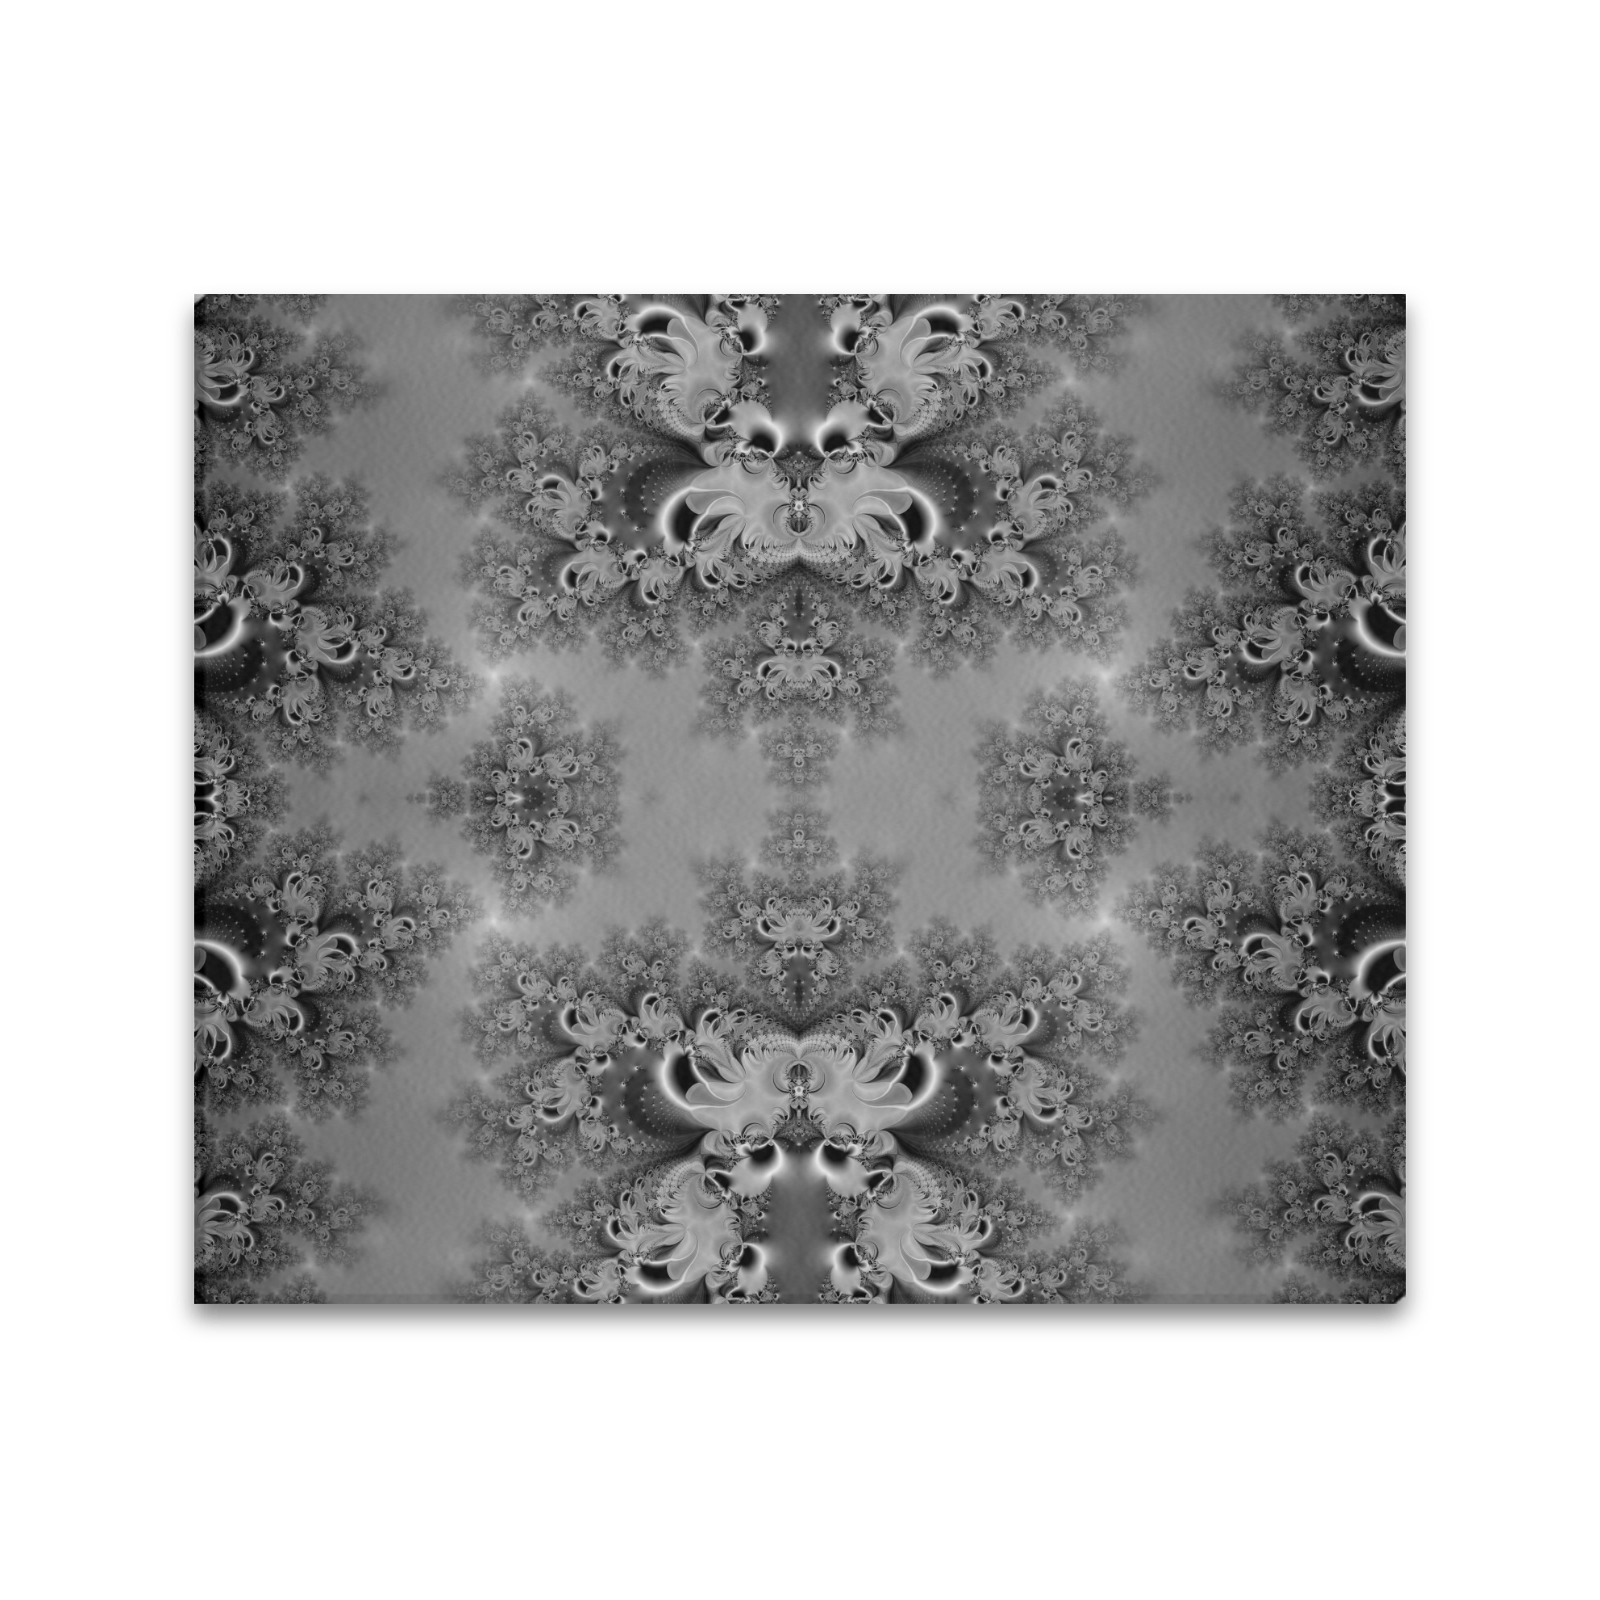 Cloudy Day in the Garden Frost Fractal Frame Canvas Print 24"x20"